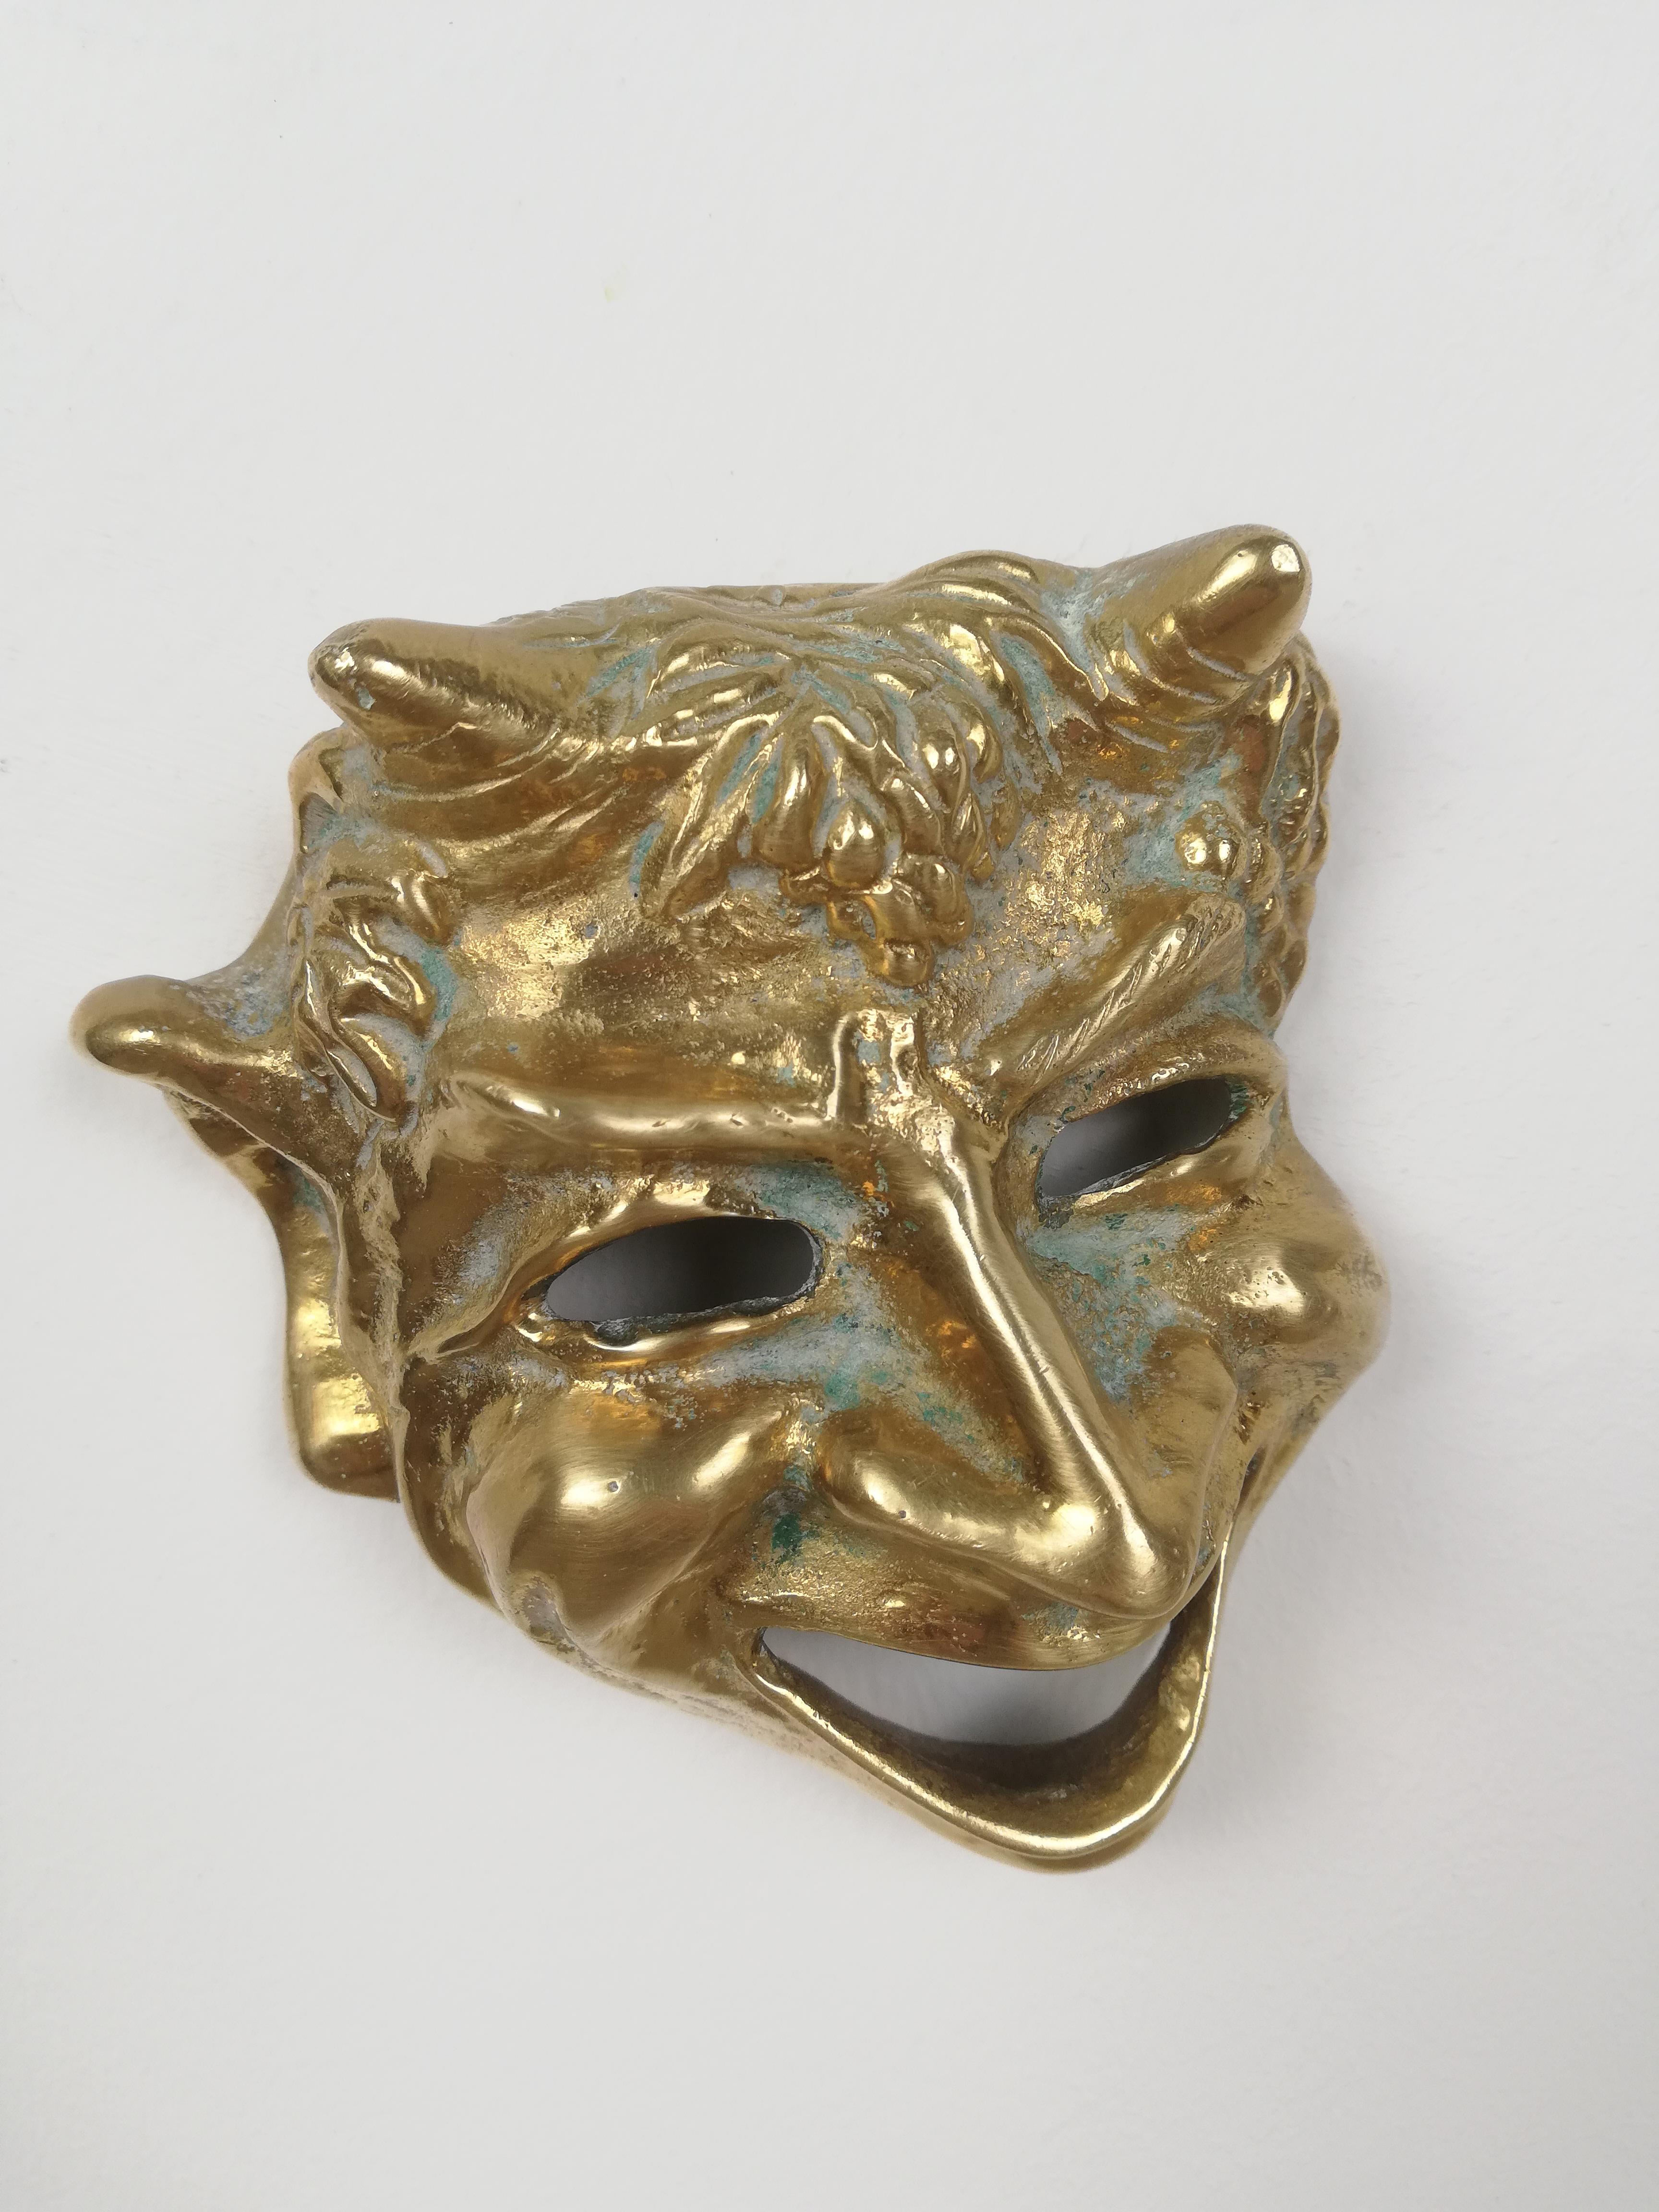 greek tragedy and comedy masks